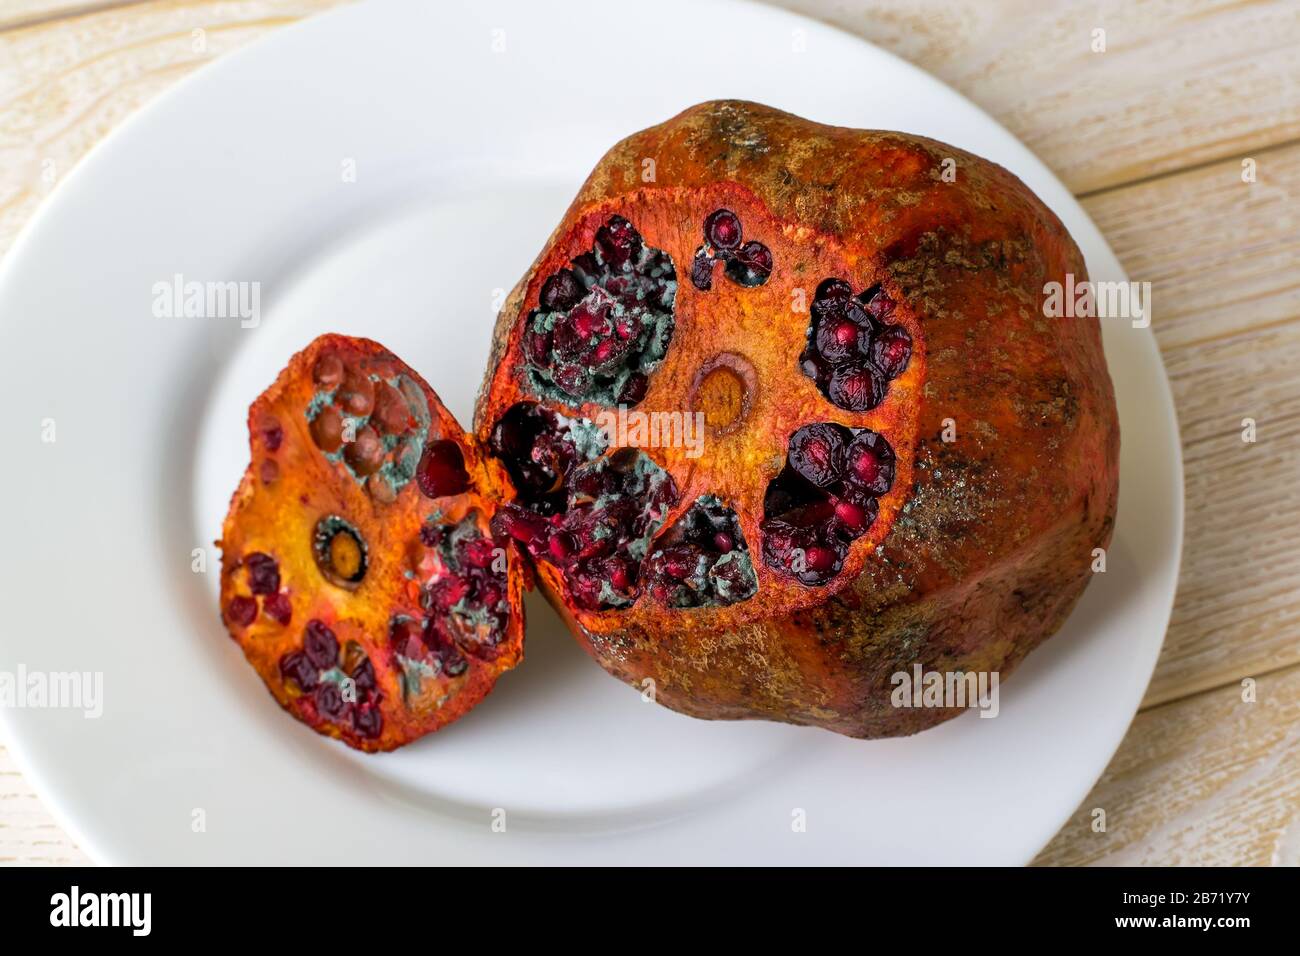 Green fungal mold inside of rotten pomegranate on a white plate. Spoiled fruits and vegetables. Improper or too long food storage. Top view. Stock Photo